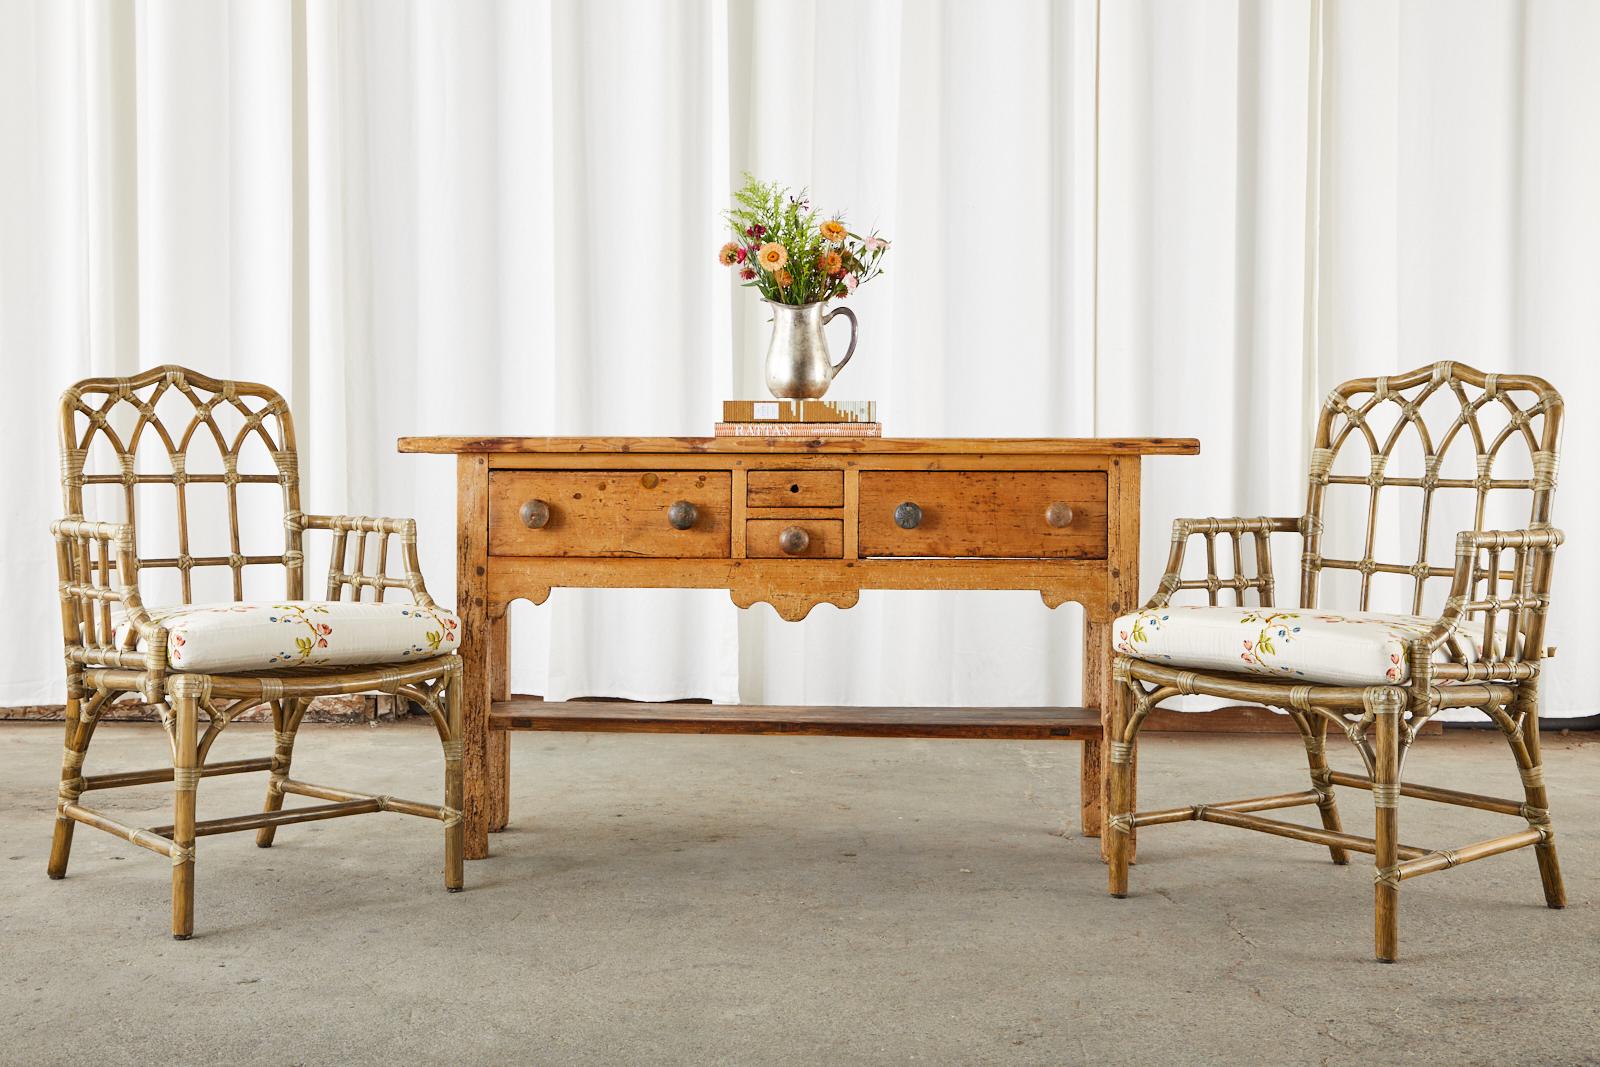 Rustic 19th century country French provincial console table or server crafted from pine. The table features an aged, distressed patina on the pine finish with excellent joinery and craftsmanship. Made with peg joinery having two large storage